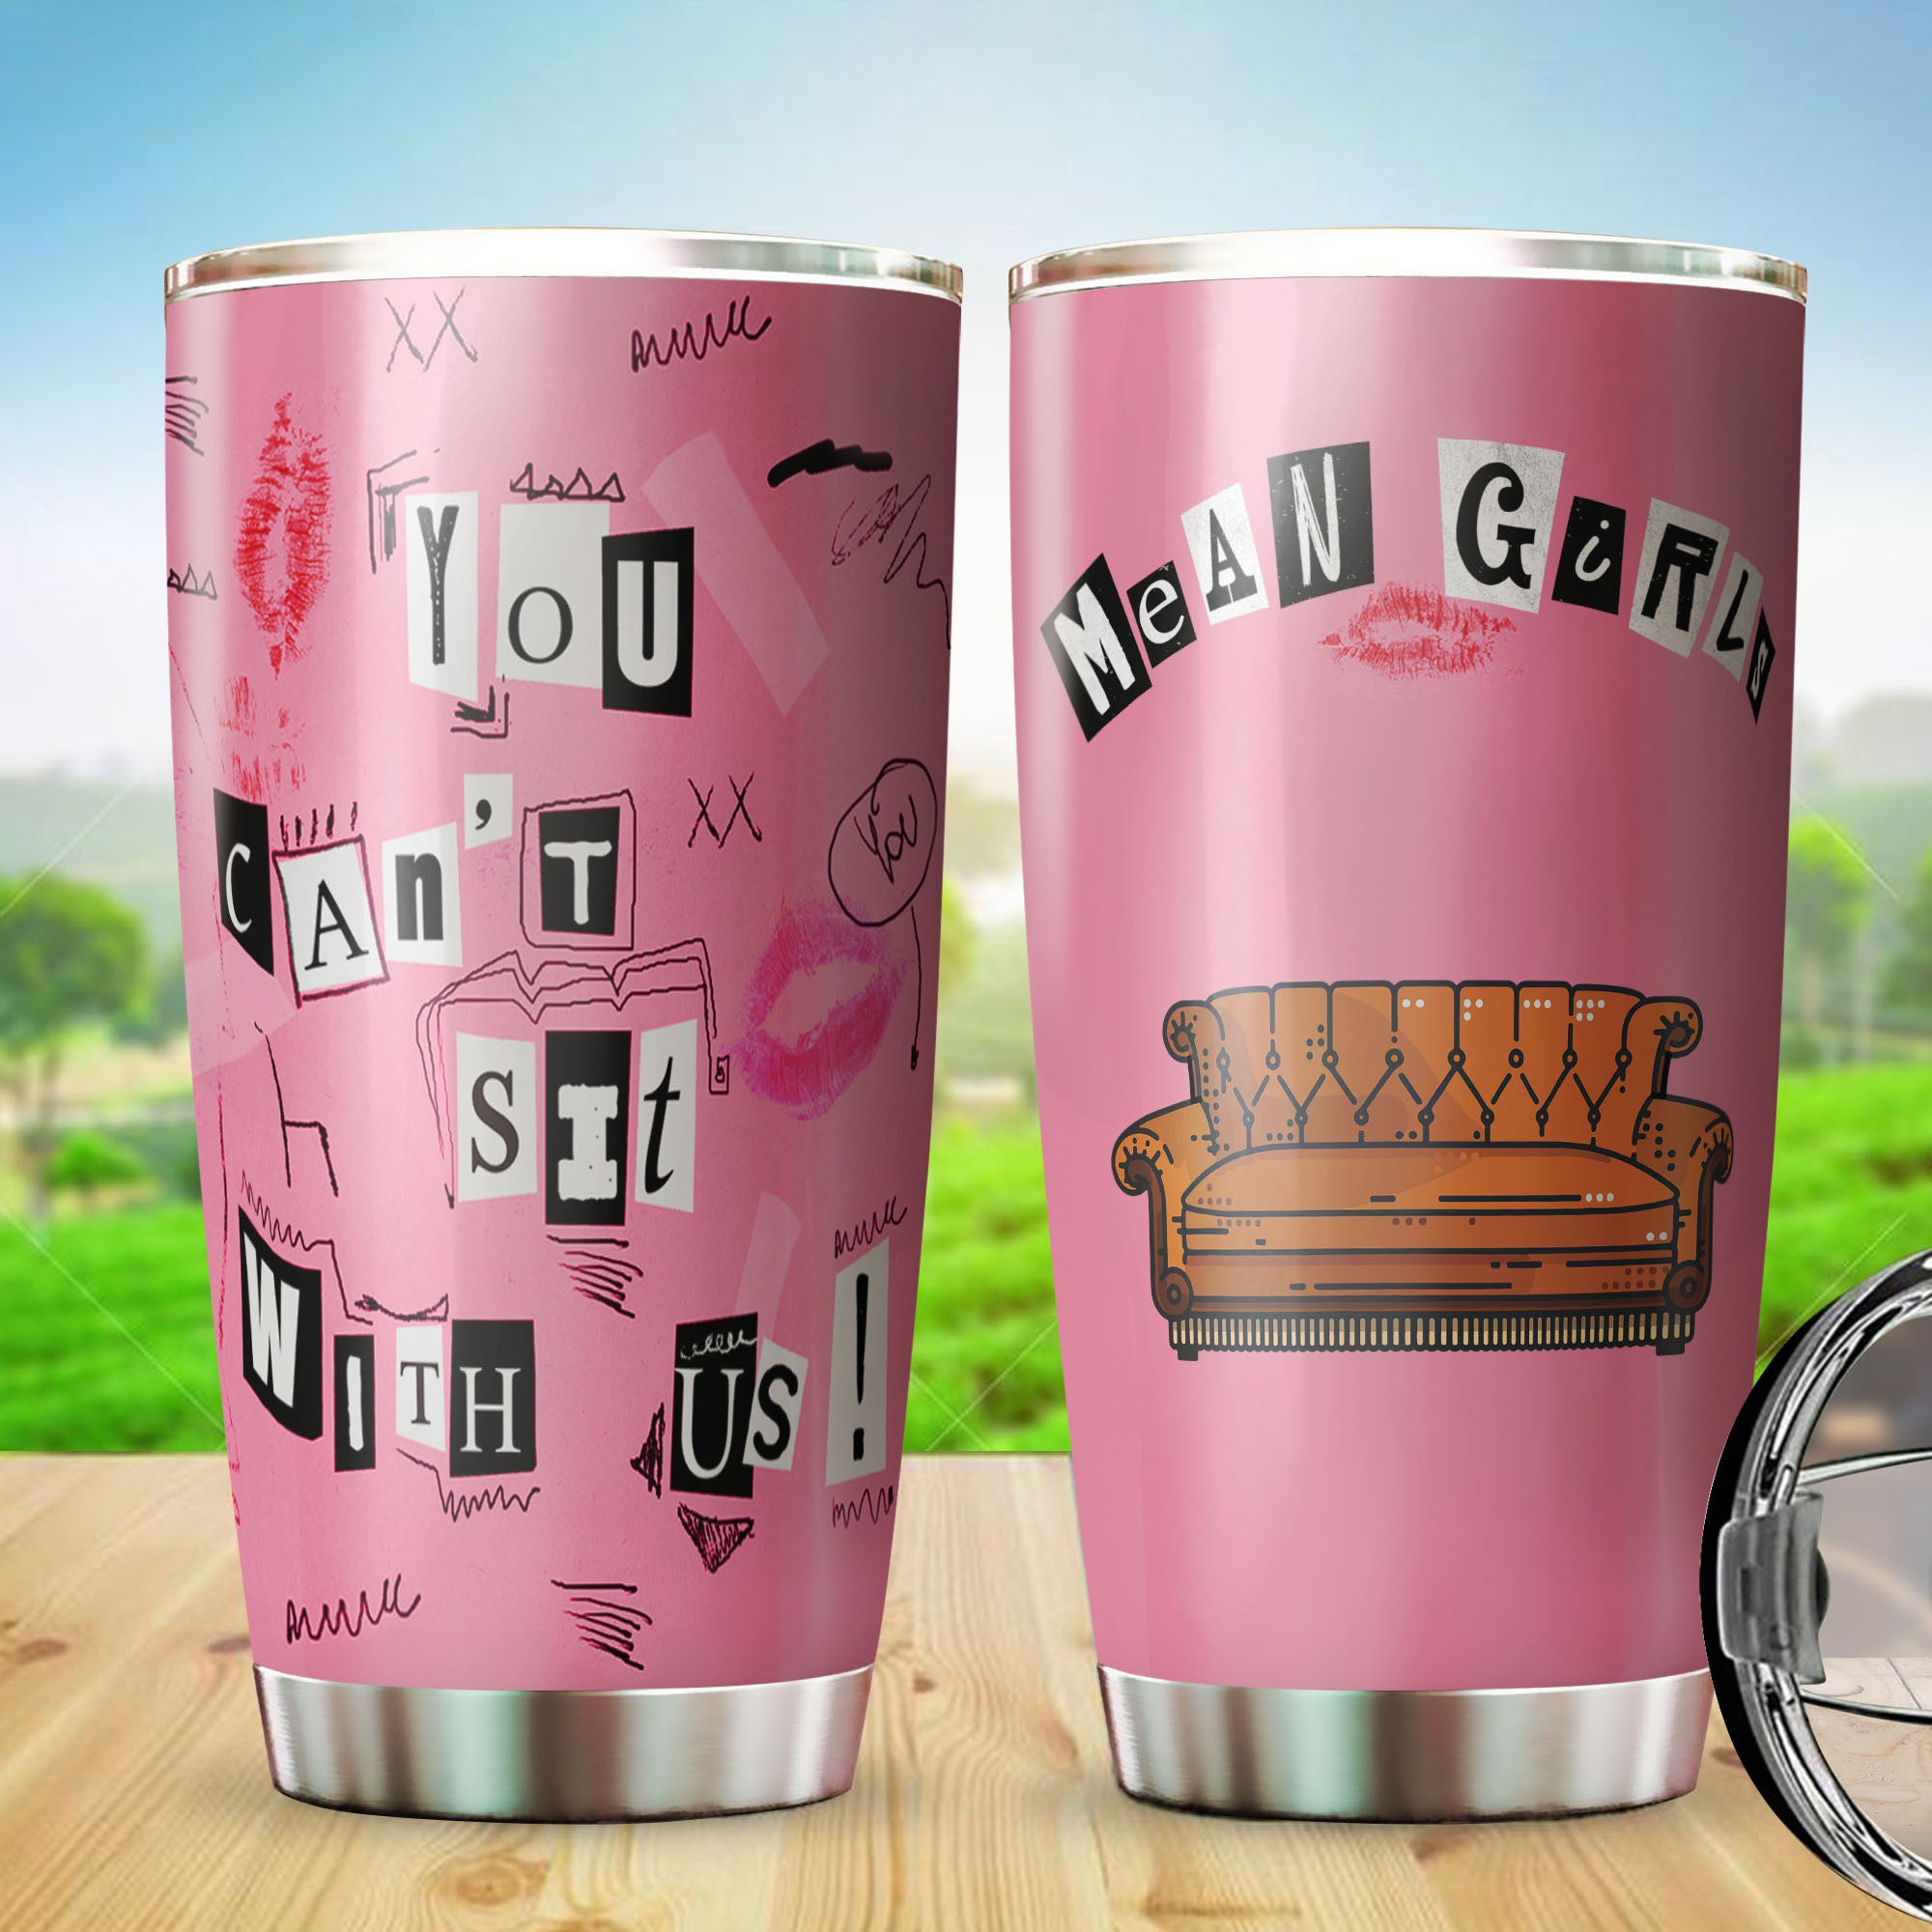 Mean Girls Tumbler -   Girls tumbler, Mean girls, Girls cup